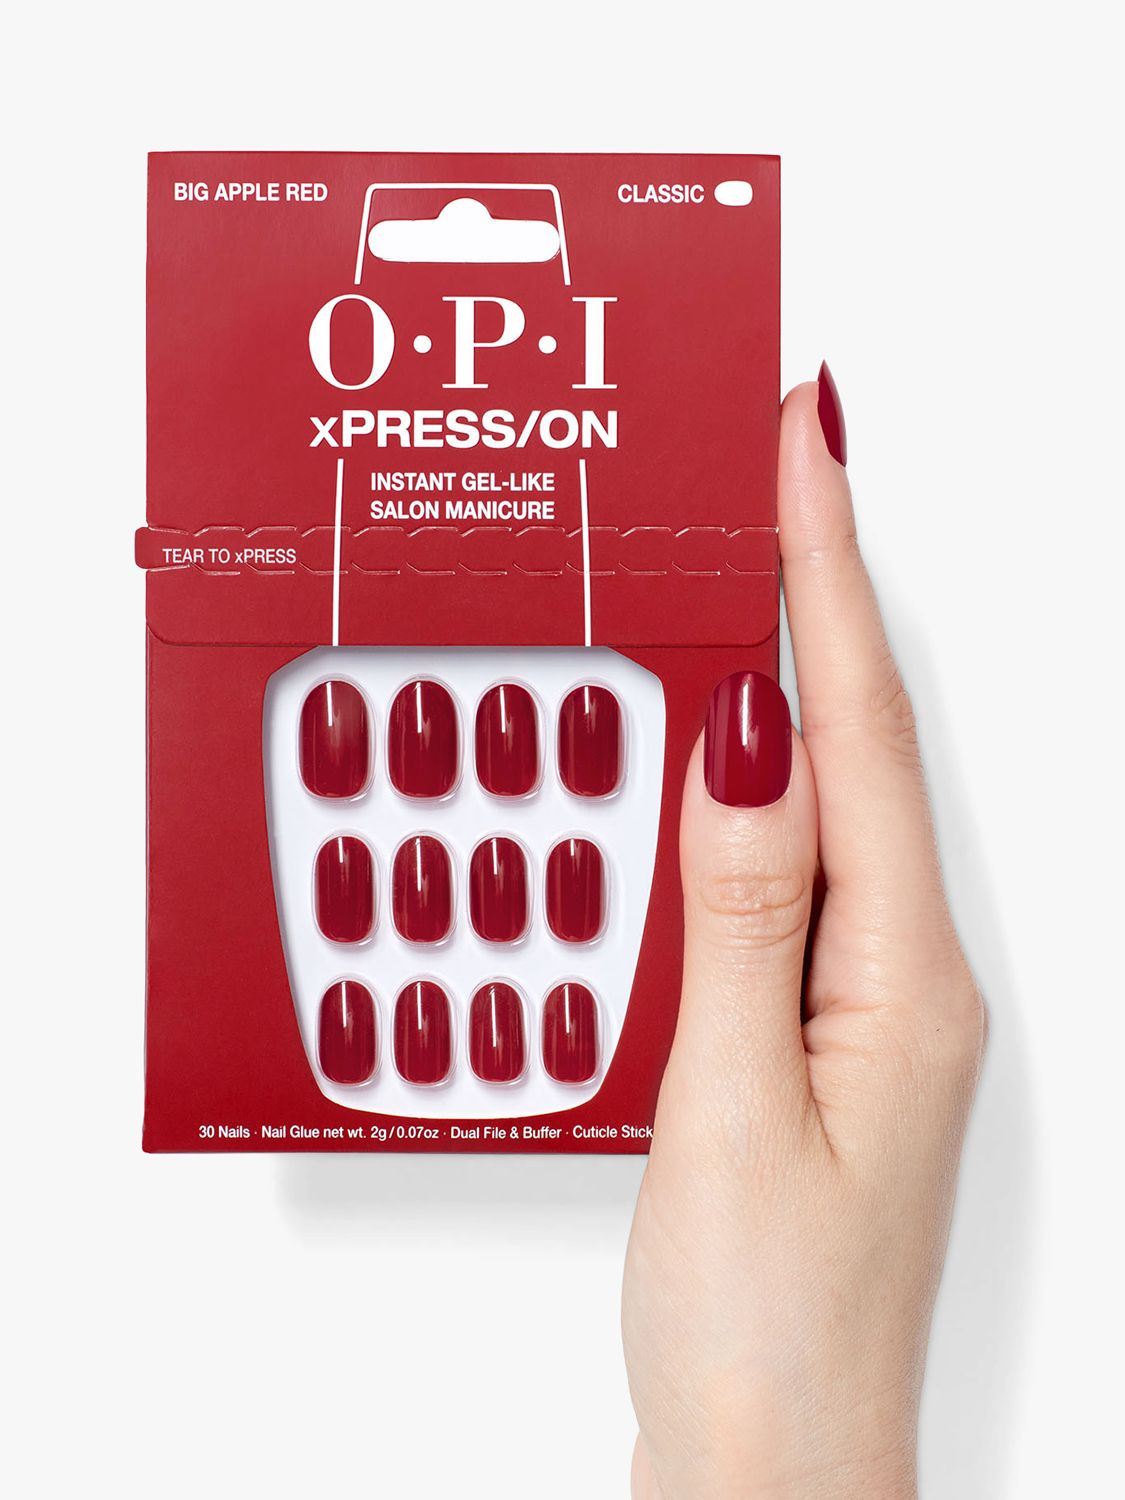 OPI xPRESS/ON Artificial Nails, Big Apple Red at John Lewis & Partners